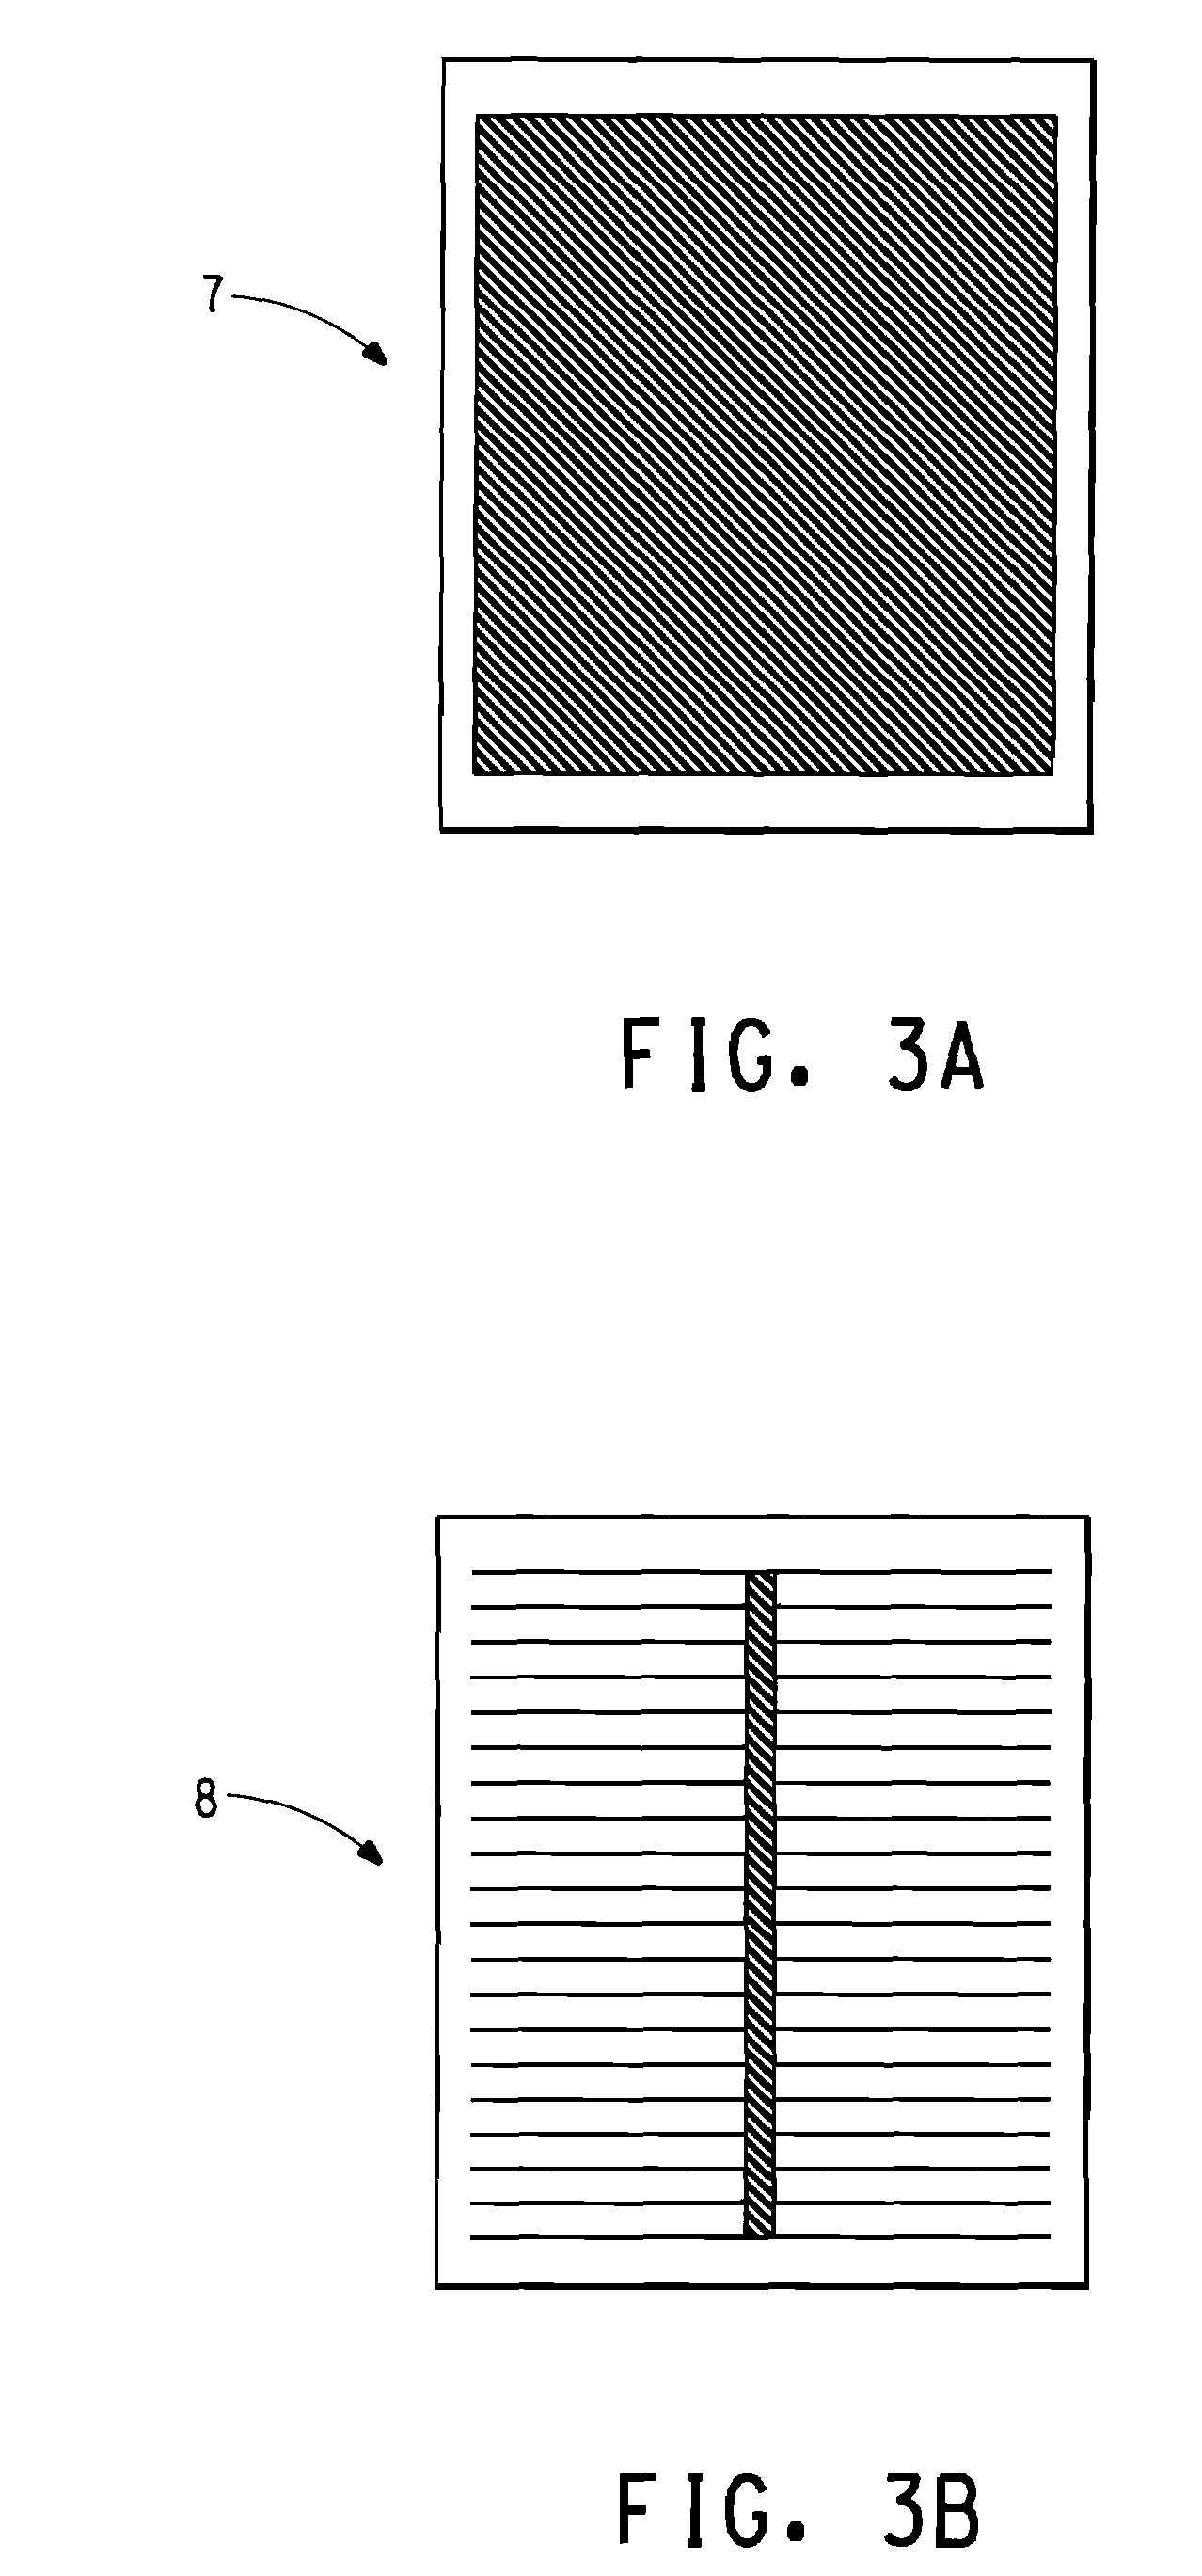 Conductive paste and grid electrode for silicon solar cells